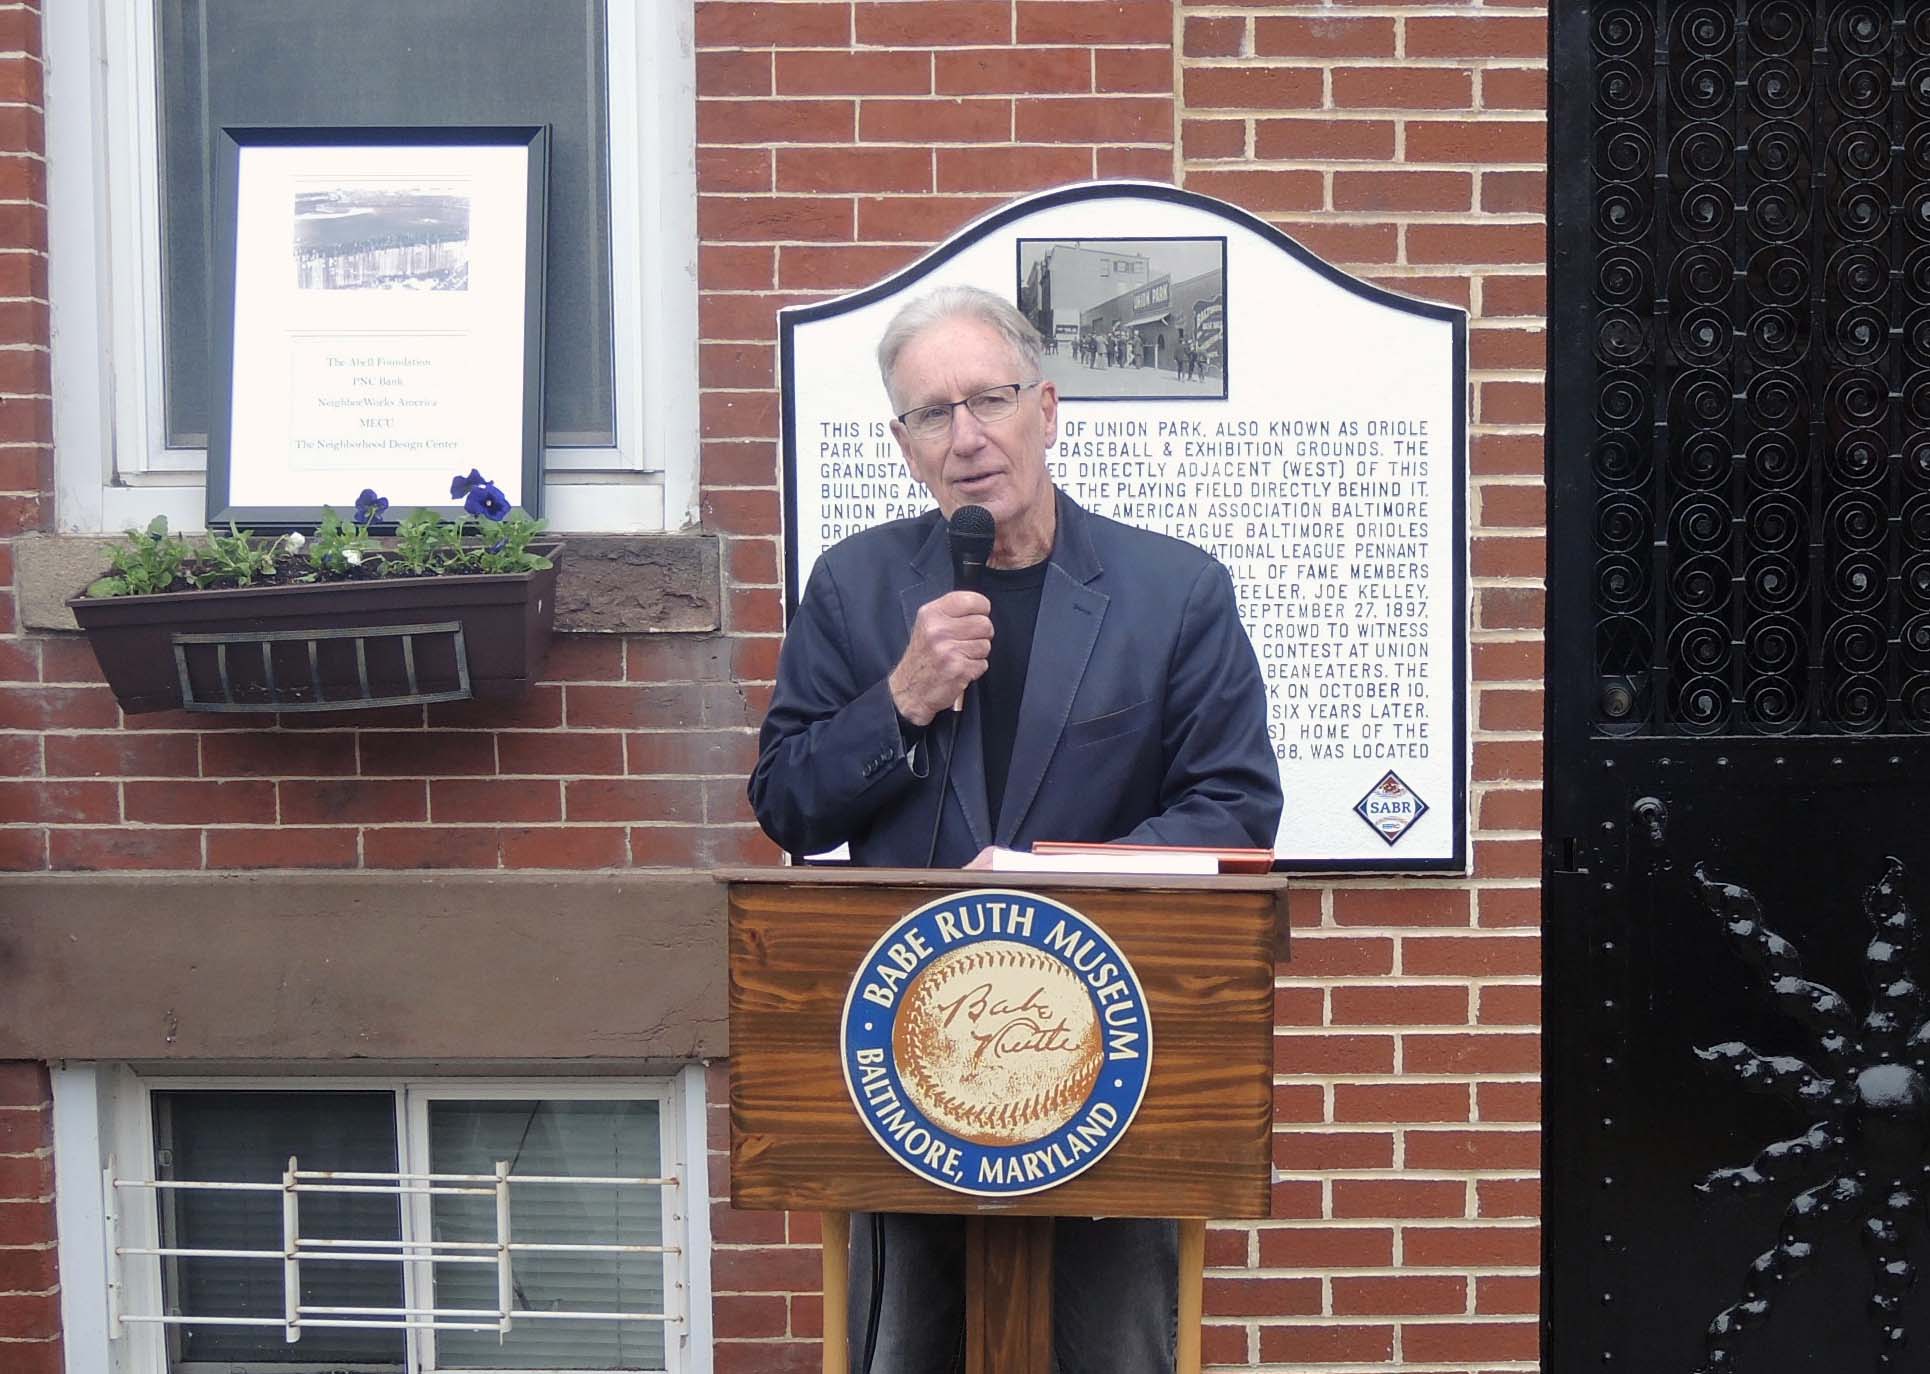 Michael Gibbons of the Babe Ruth Birthplace and Museum speaks during a dedication ceremony for a Union Park historical marker on April 19, 2024, in Baltimore, Maryland.